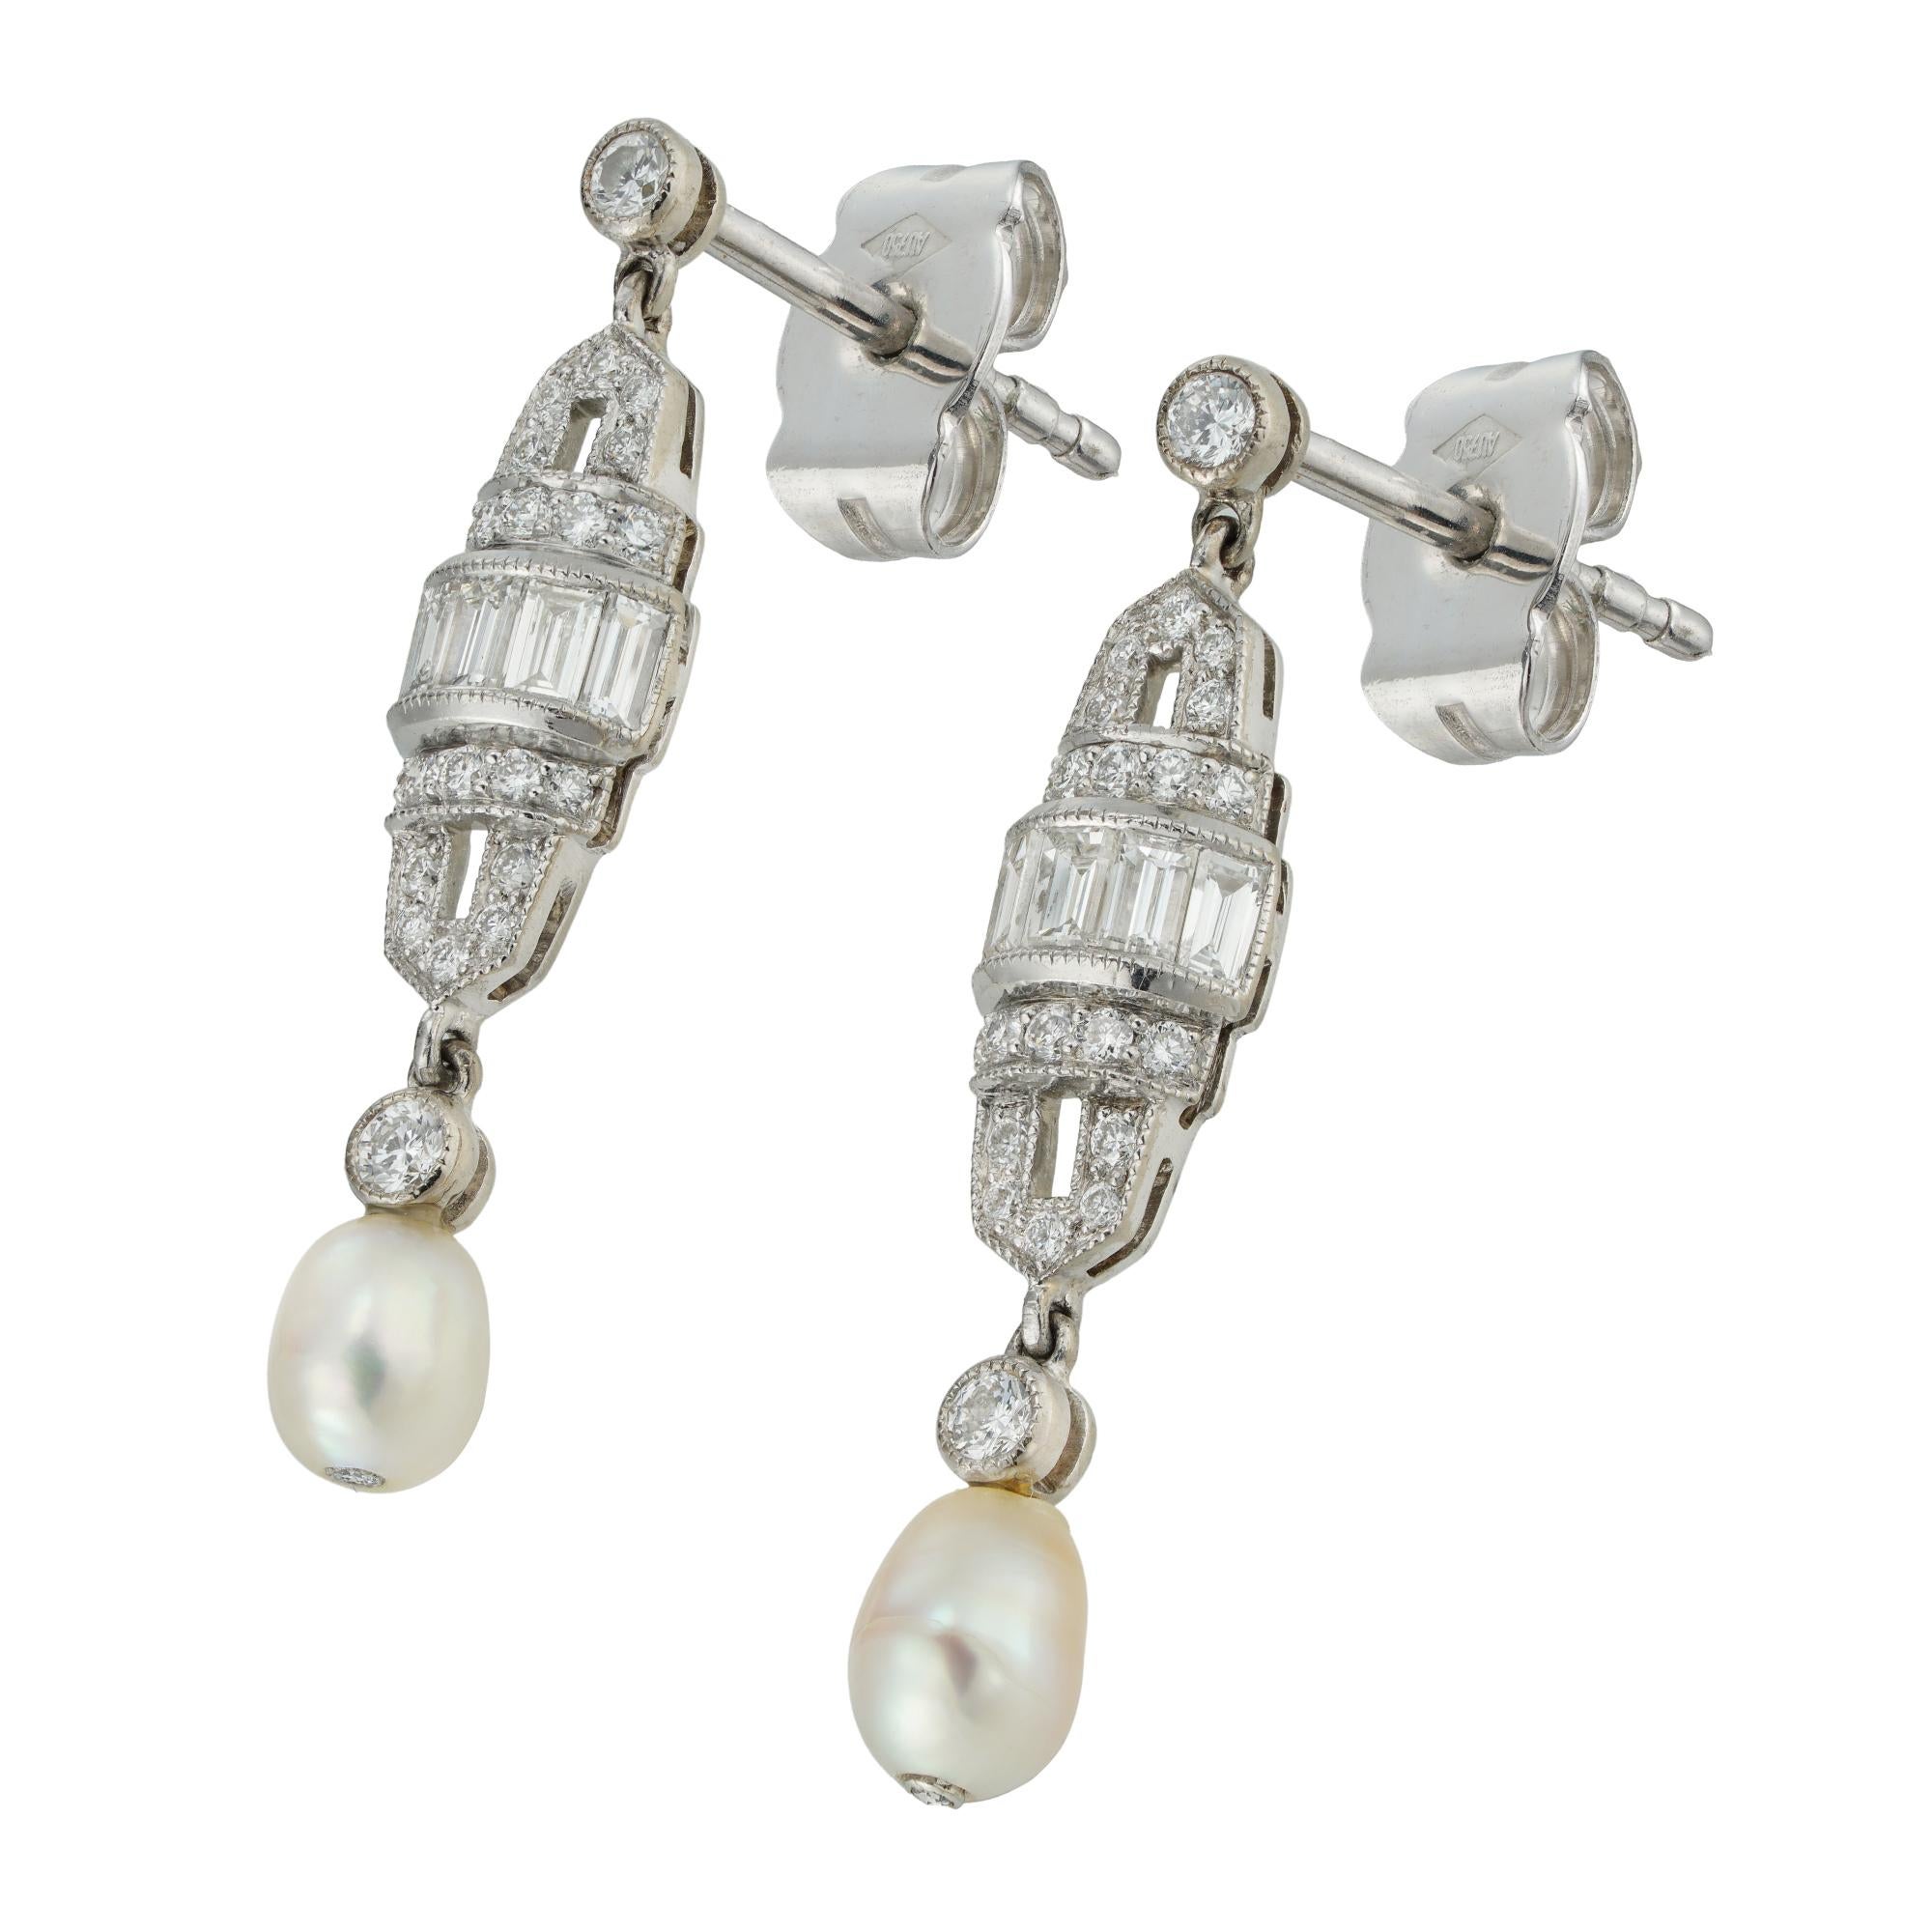 A pair of Art Deco style pearl and diamond drop earrings, each earring with a barrel-shaped openwork diamond-set plaque, centrally set with a line of baguette-cut diamonds within circular-cut diamond-set borders, suspended from a single diamond and